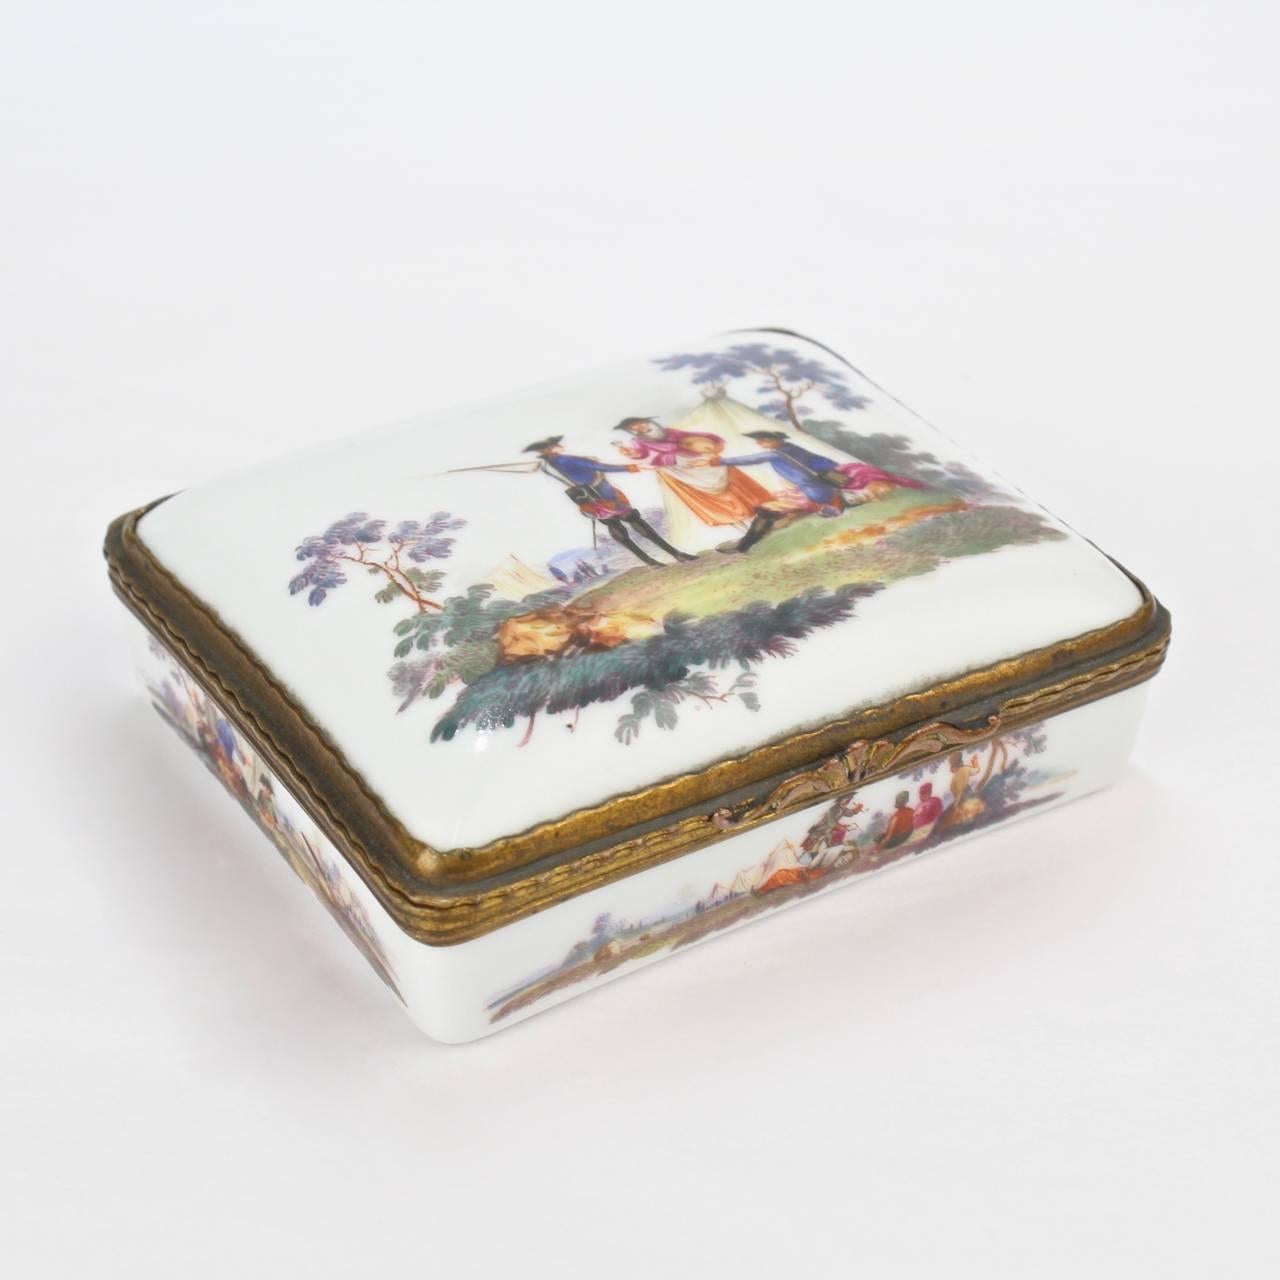 A good late 18th (or possibly early 19th) century continental porcelain snuff box with hand-painted military-related scenes and vignettes.

The interior of the lid has a large scene painted of what is likely a general in battle with drawn sword.